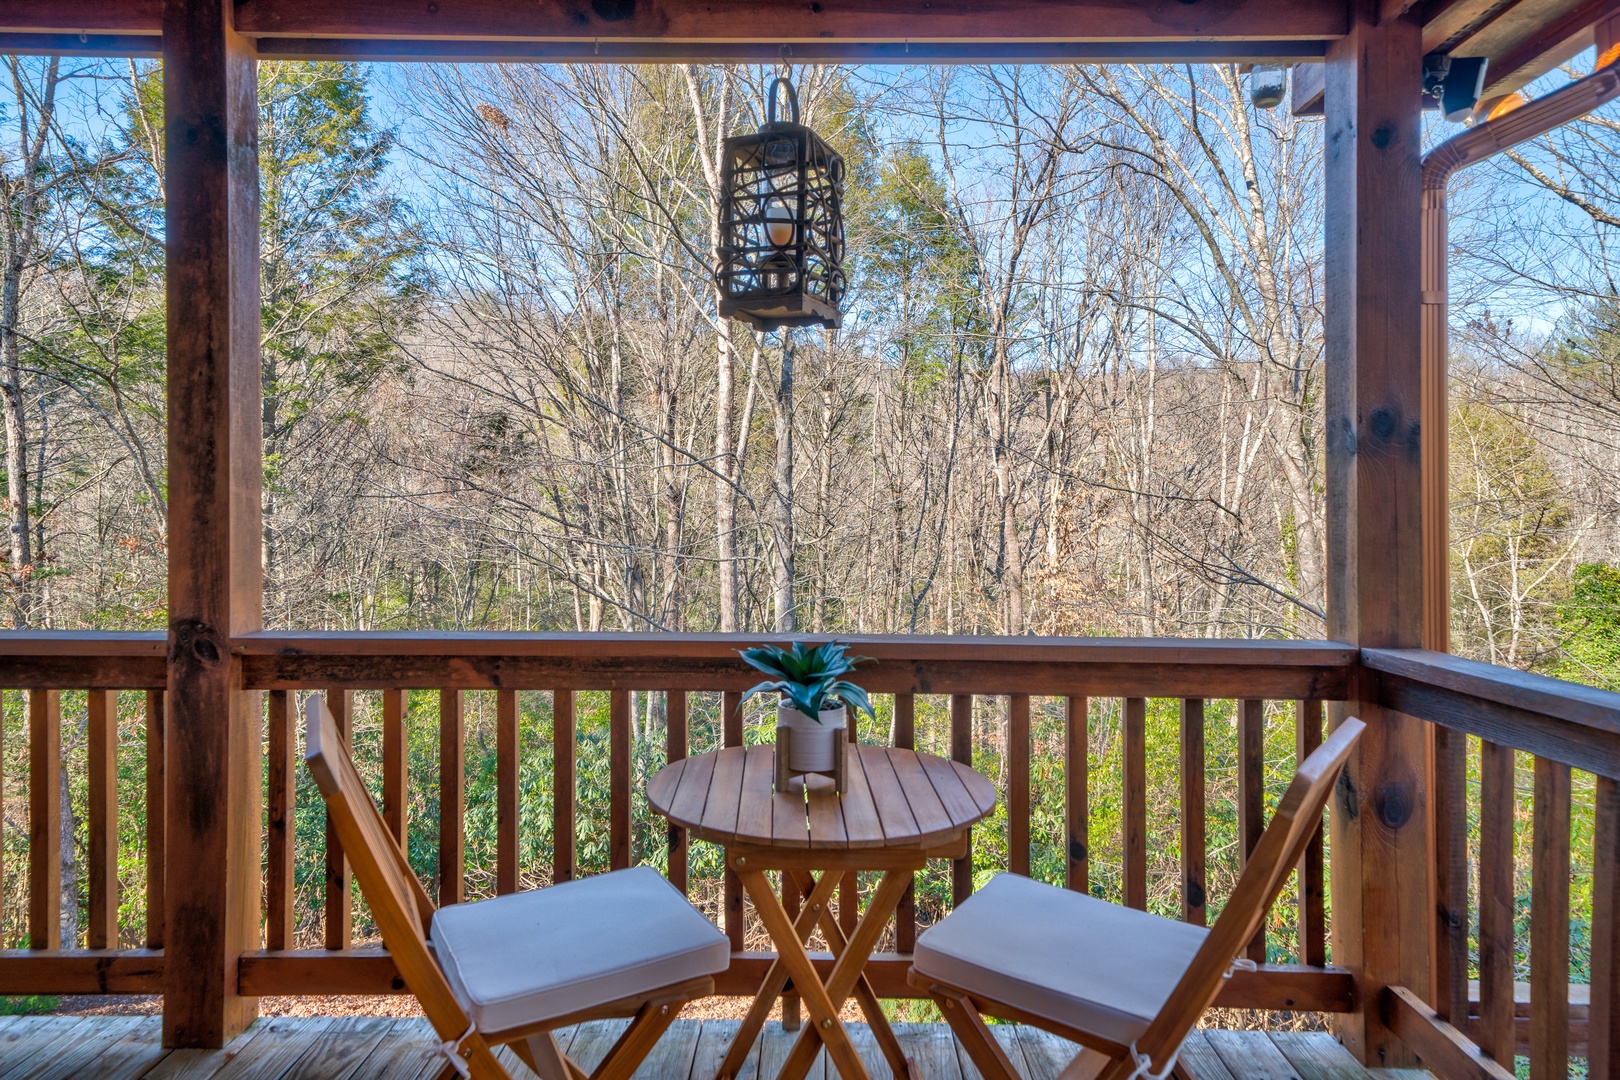 Savor the crisp breeze on the porch with comfortable outdoor seating